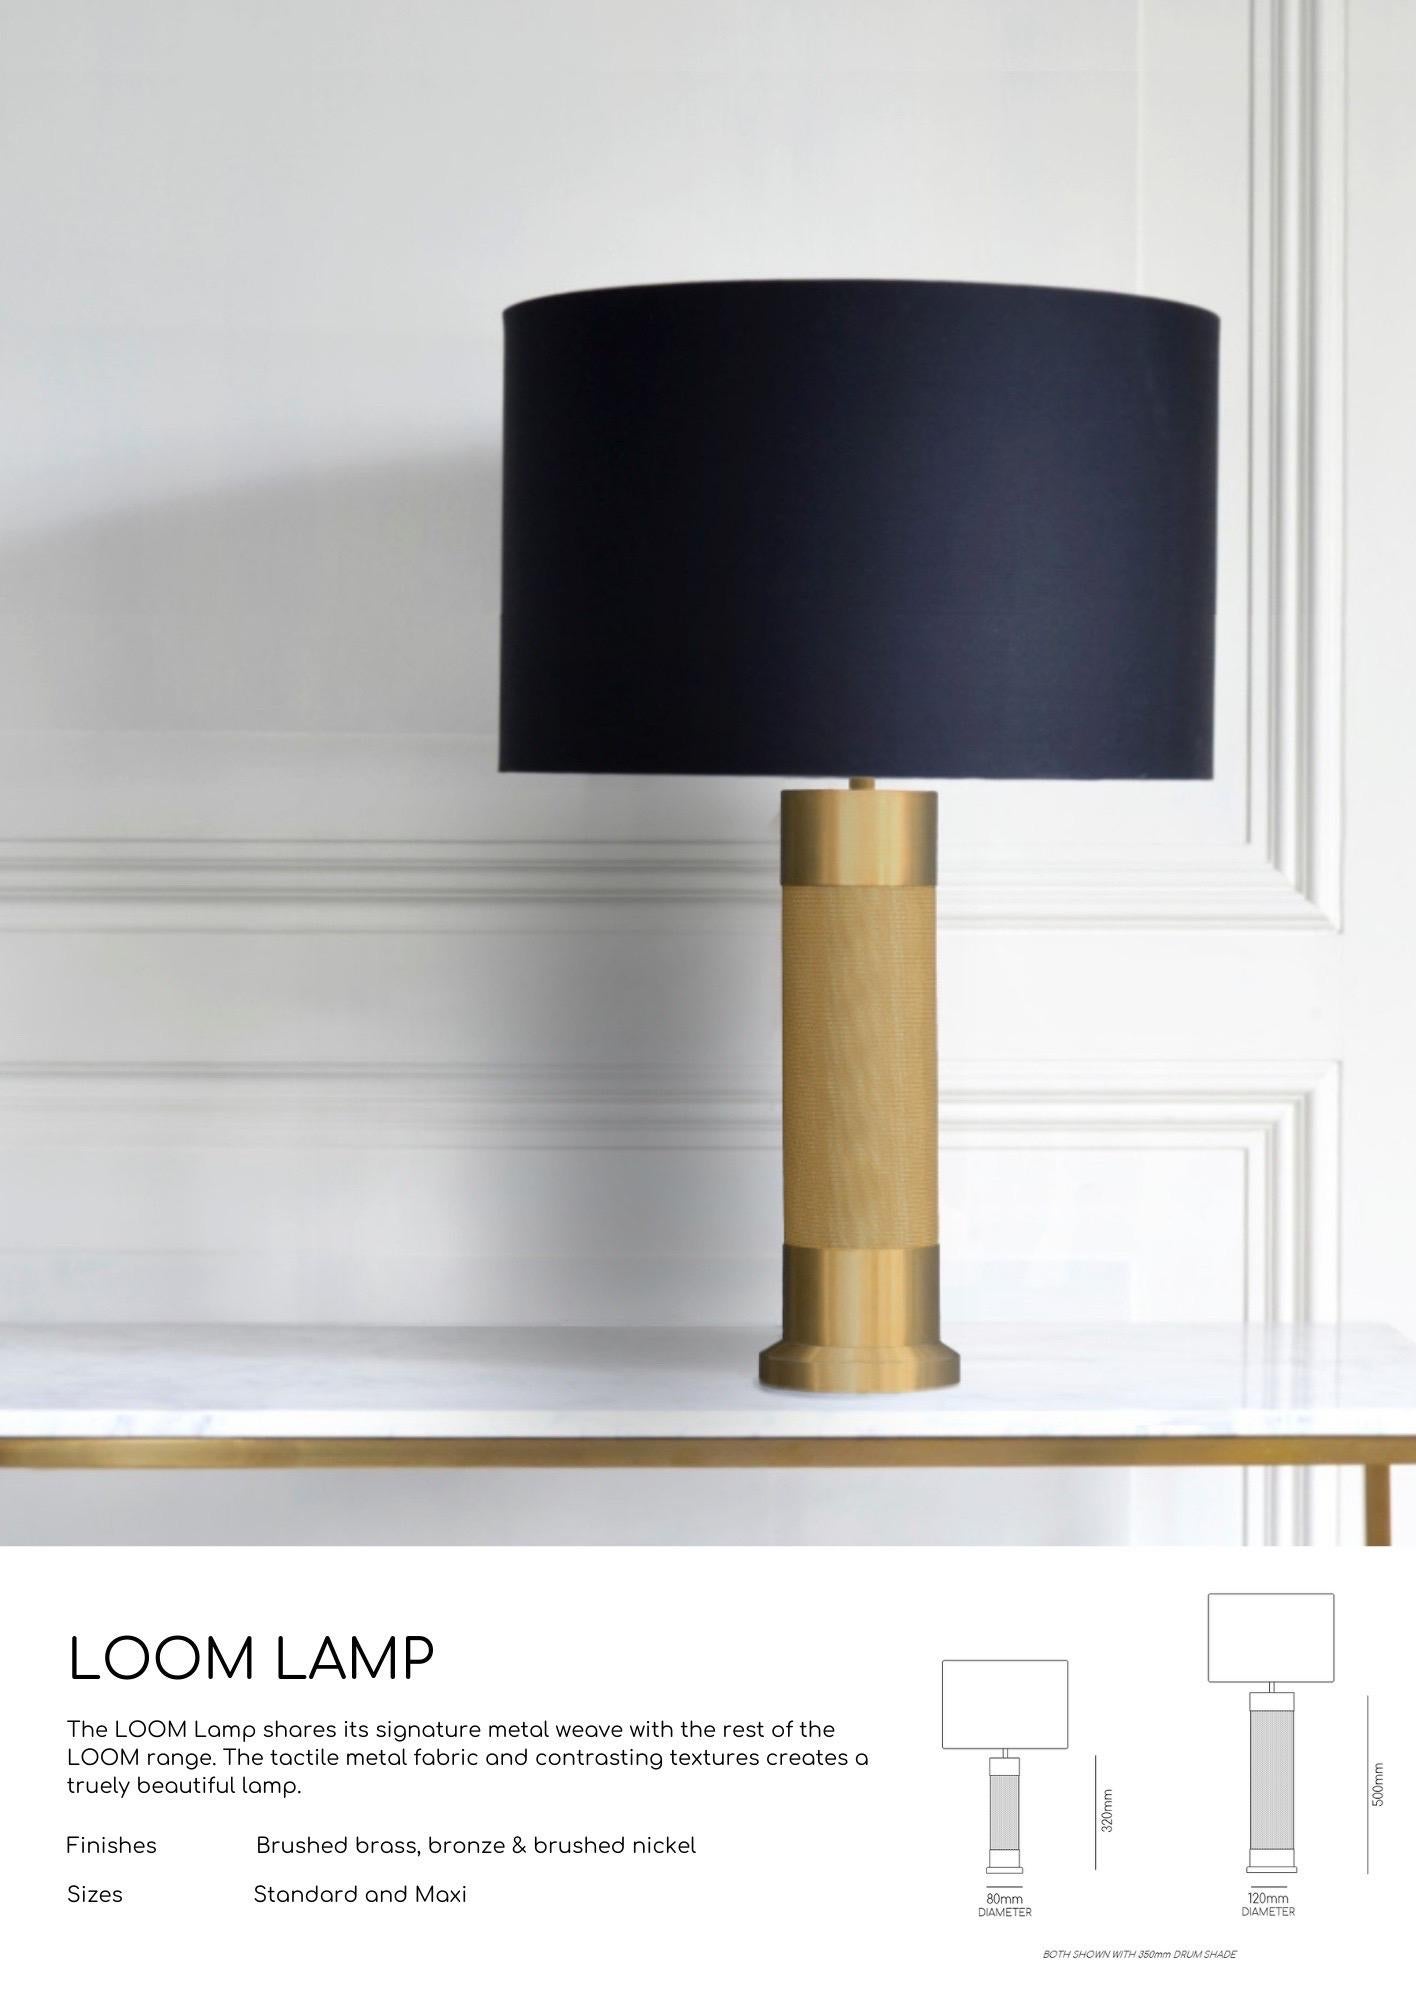 Beautiful navy blue shade, 40cm dia, handmade in Britain. Perfect for combining with our FLUX table lamp or our LOOM maxi table lamp. Double lined with a white interior.